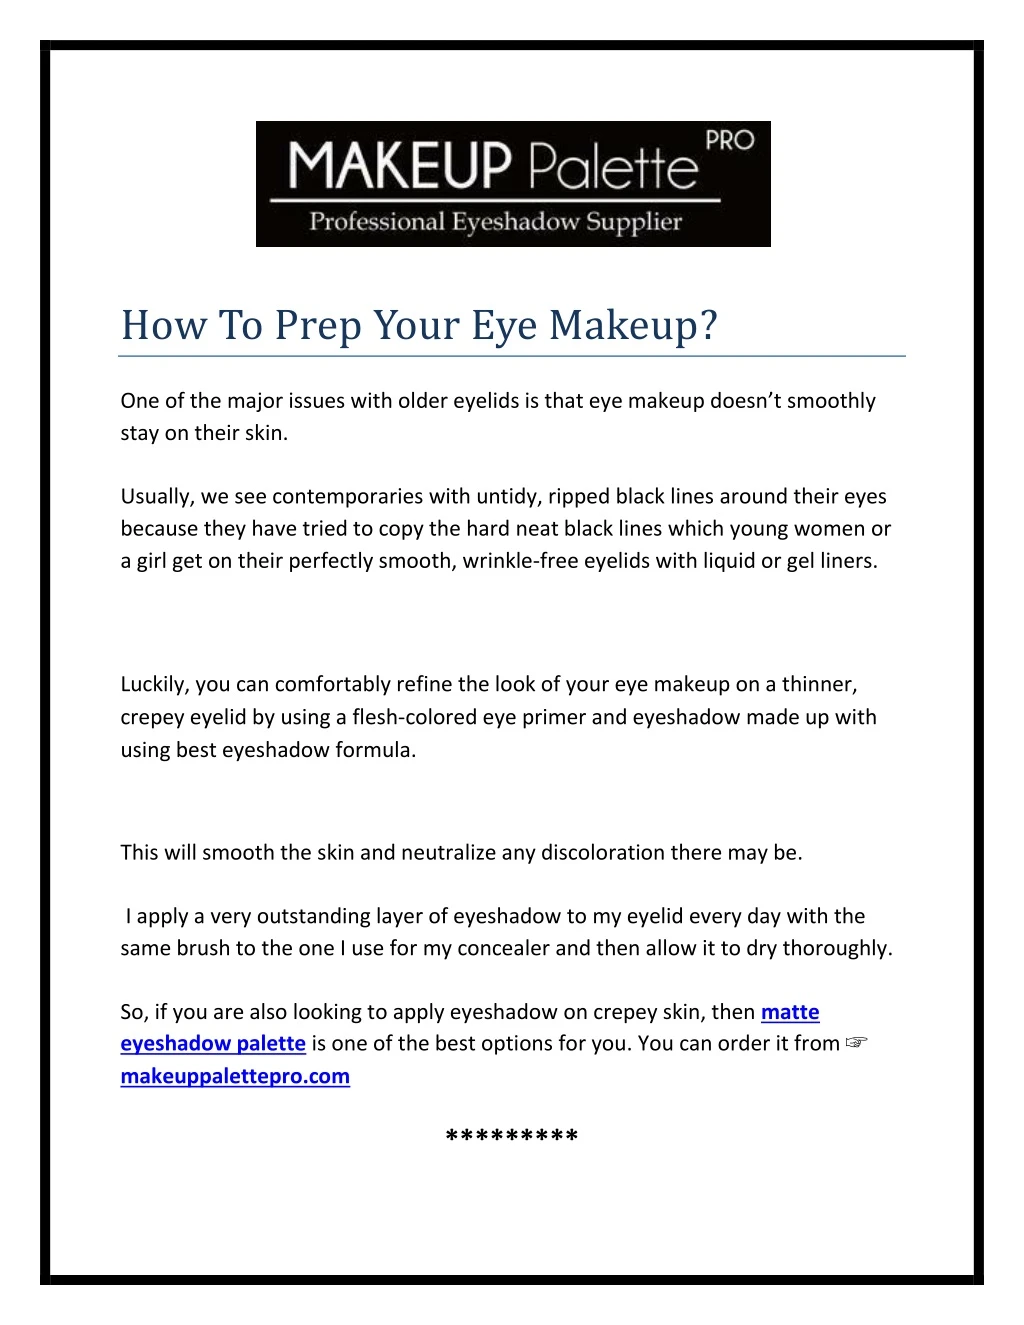 how to prep your eye makeup